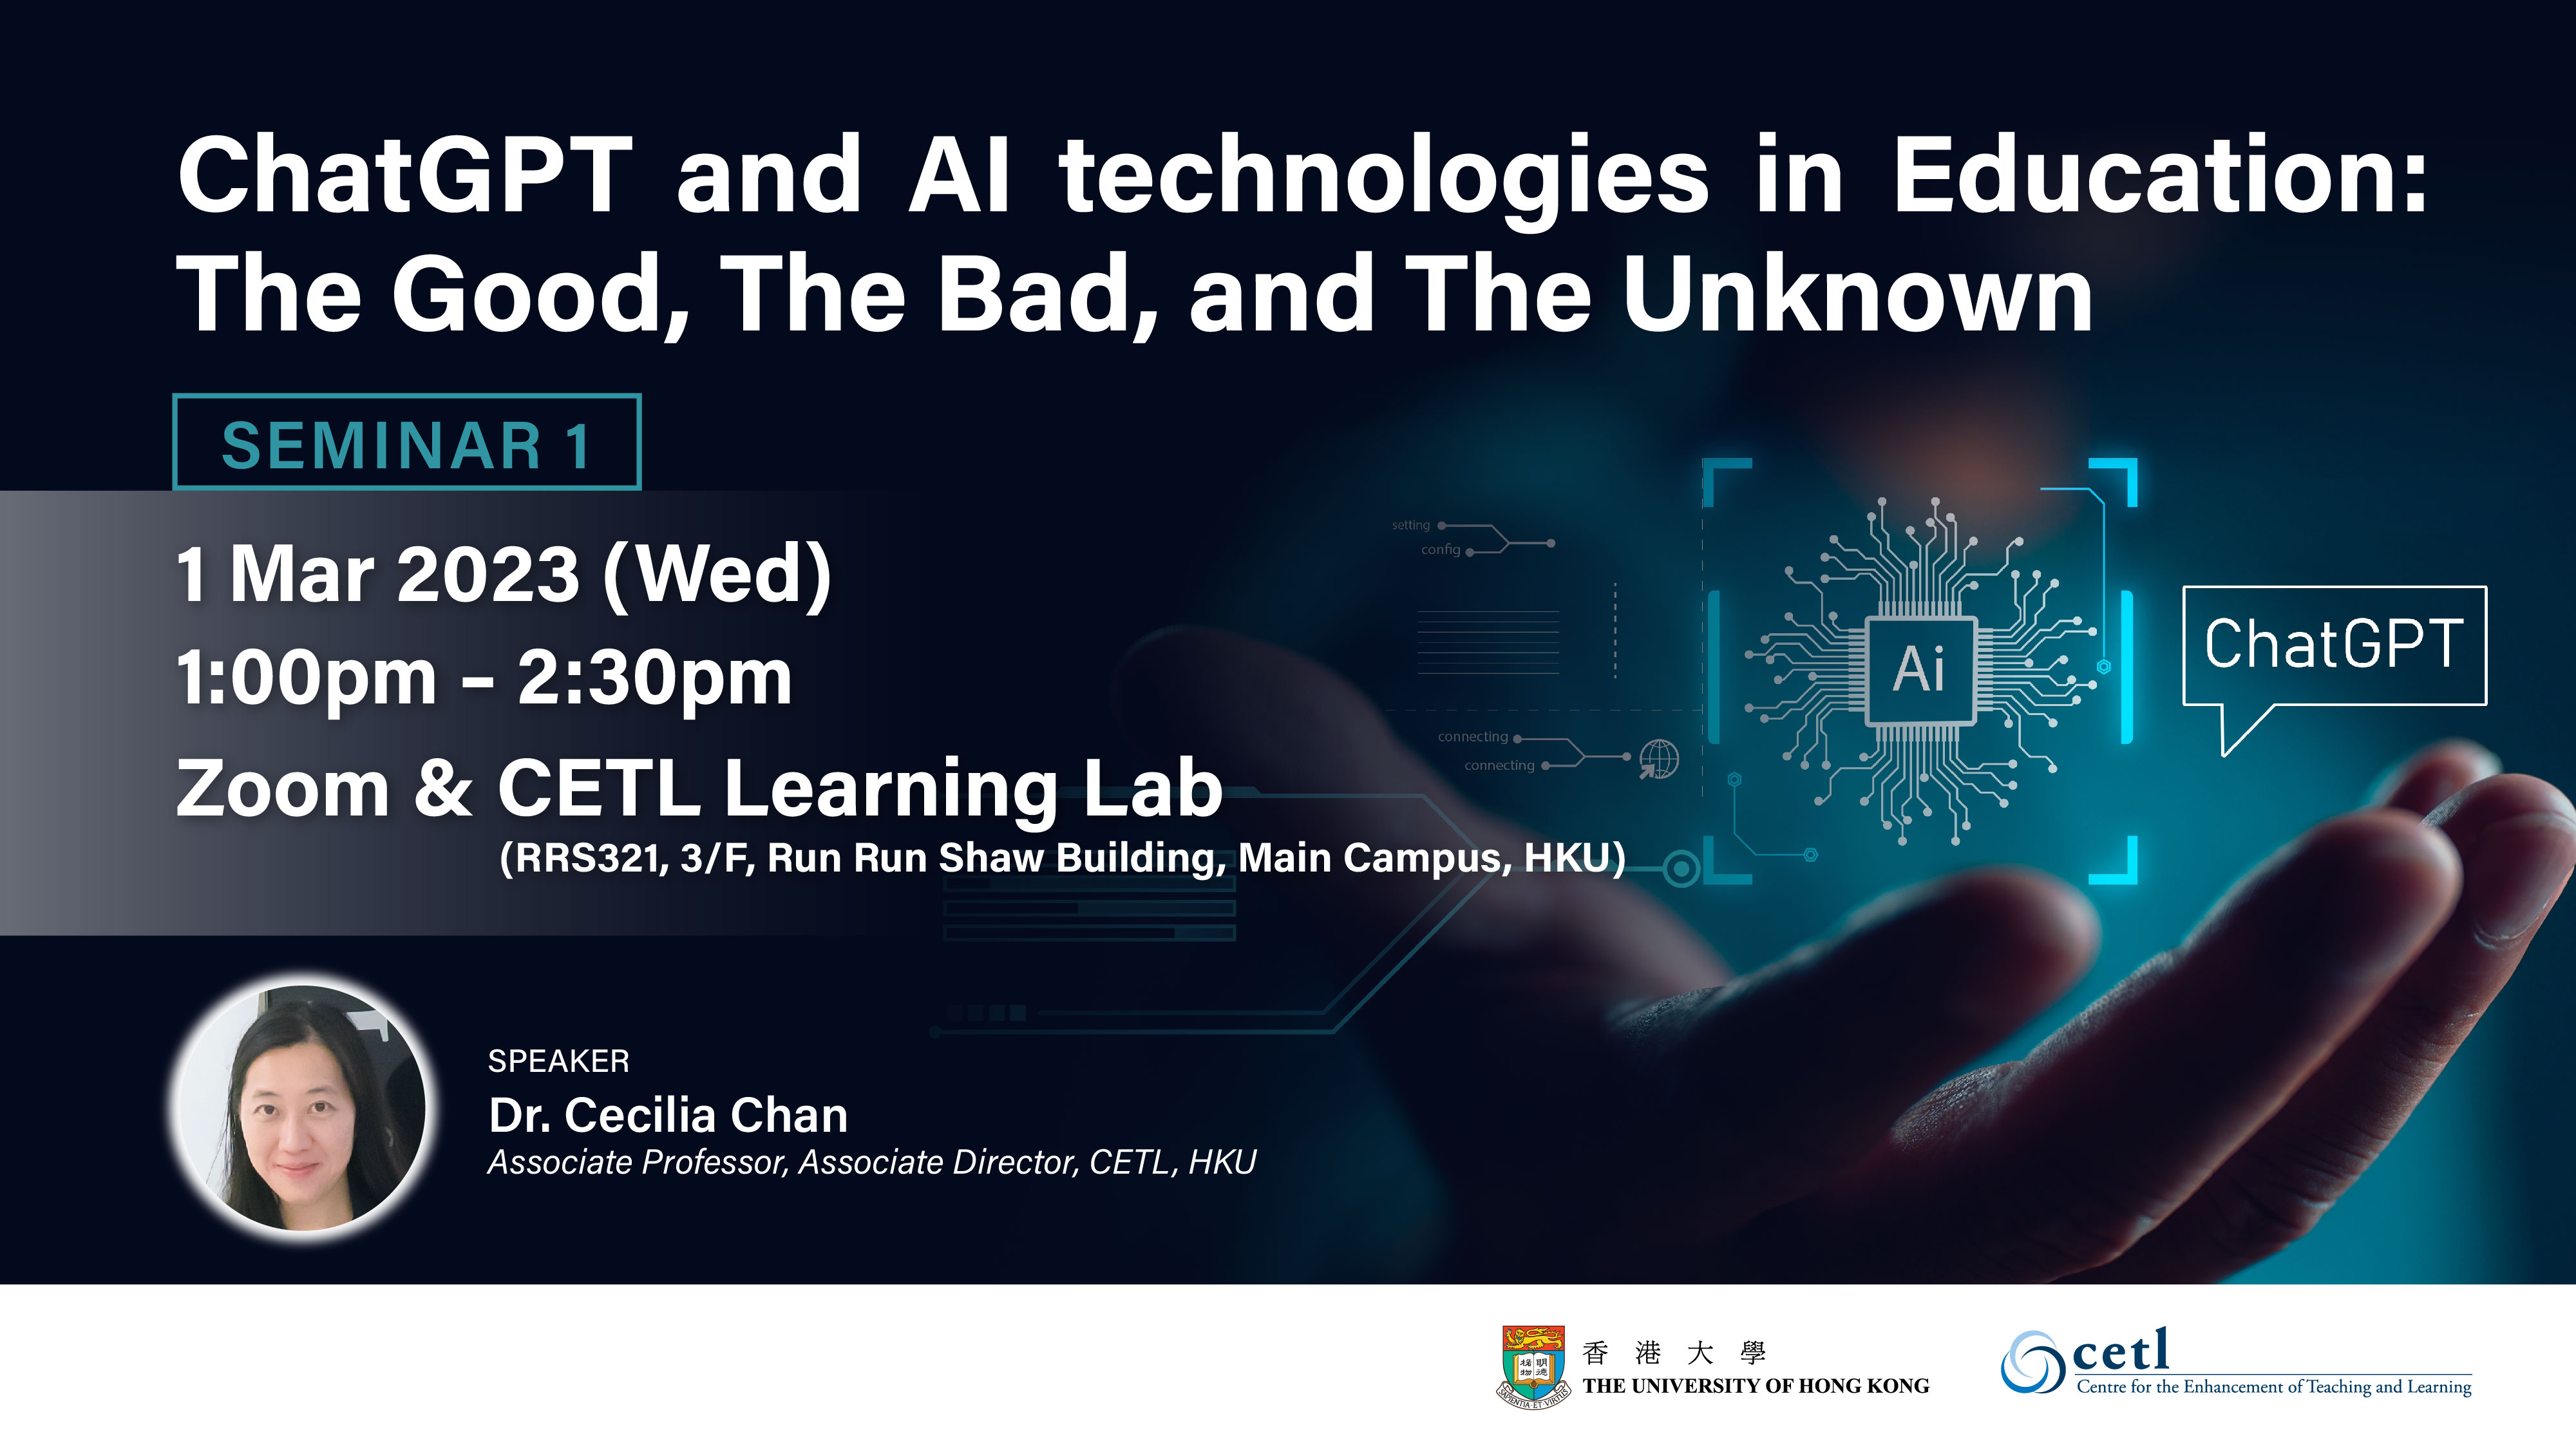 ChatGPT and AI technologies in Education: The Good, The Bad, and The Unknown